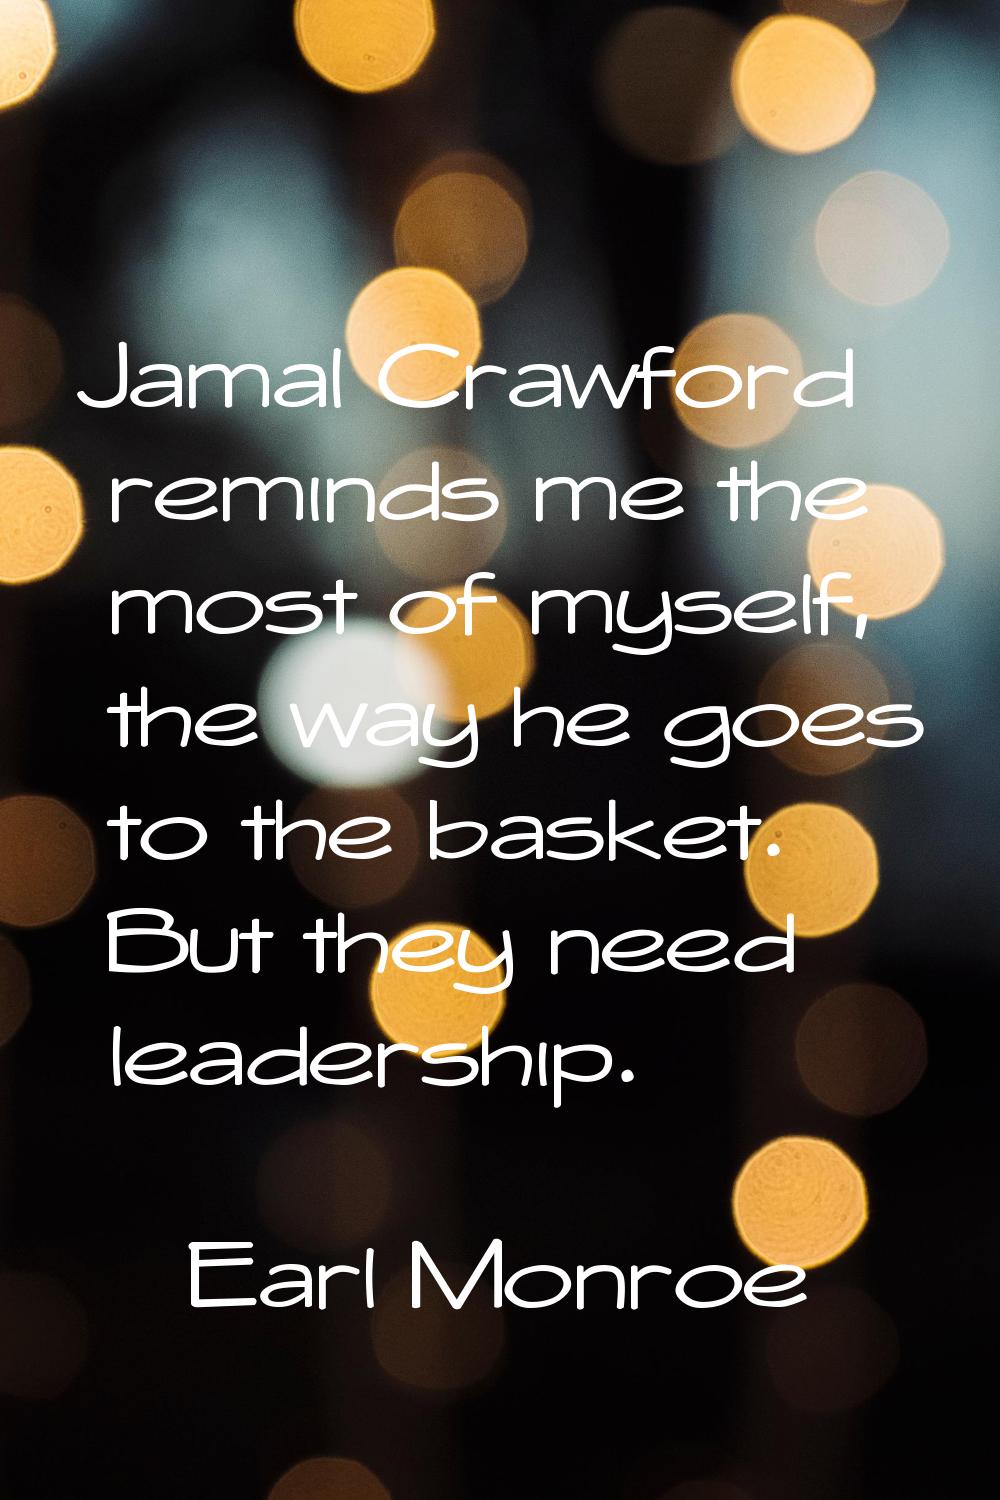 Jamal Crawford reminds me the most of myself, the way he goes to the basket. But they need leadersh